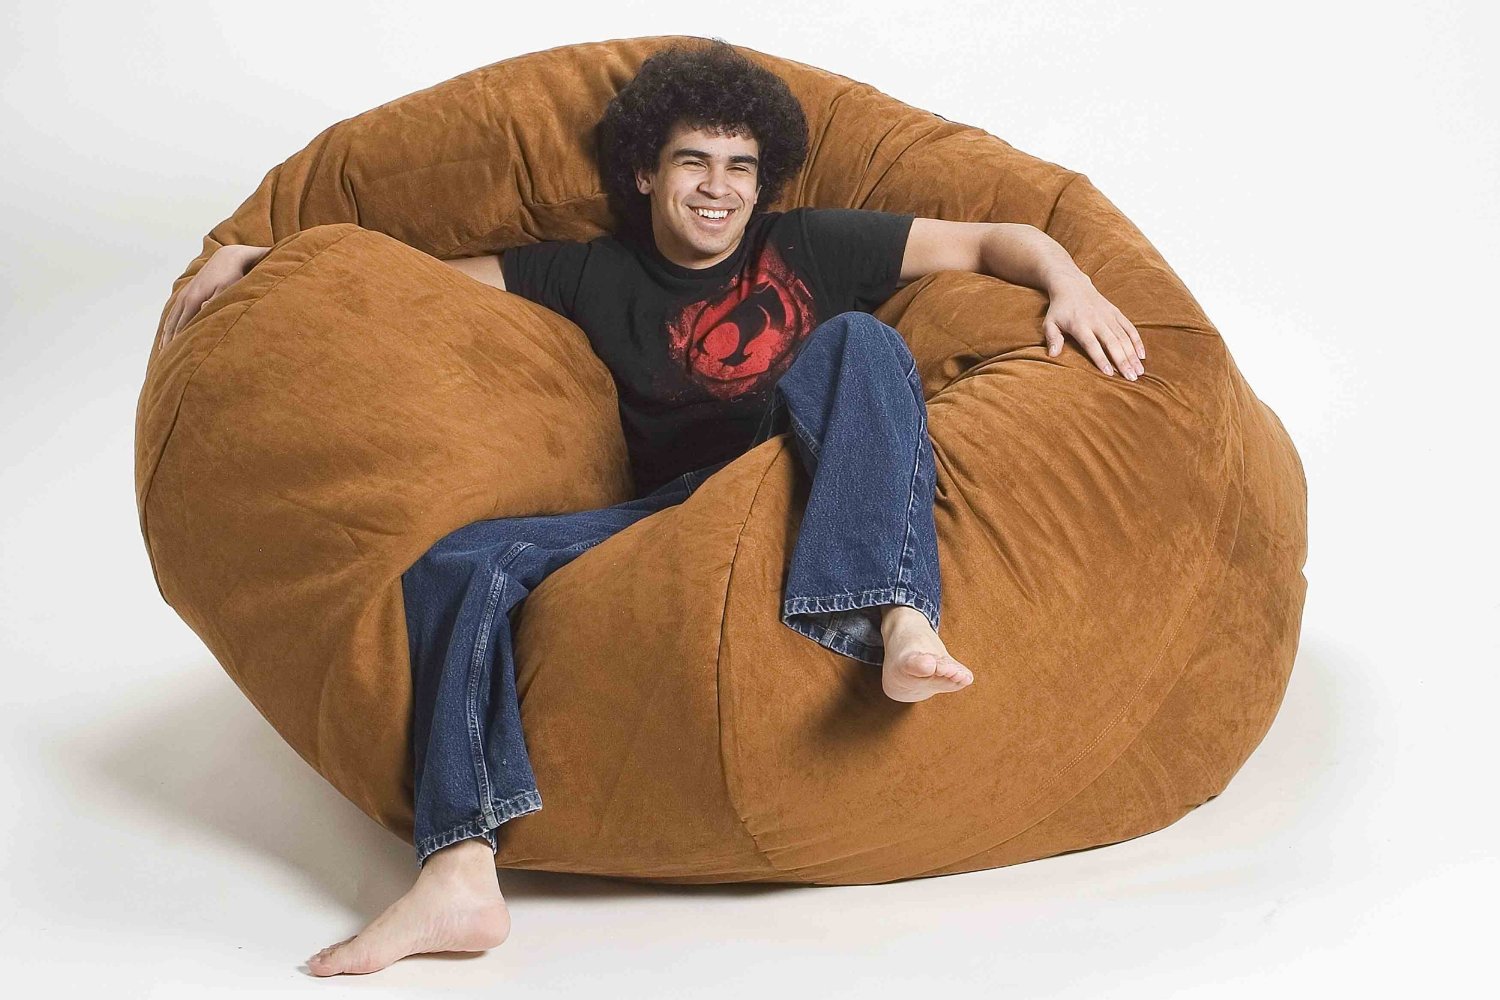 leather bean bag chairs for adults - Home Decor Ideas